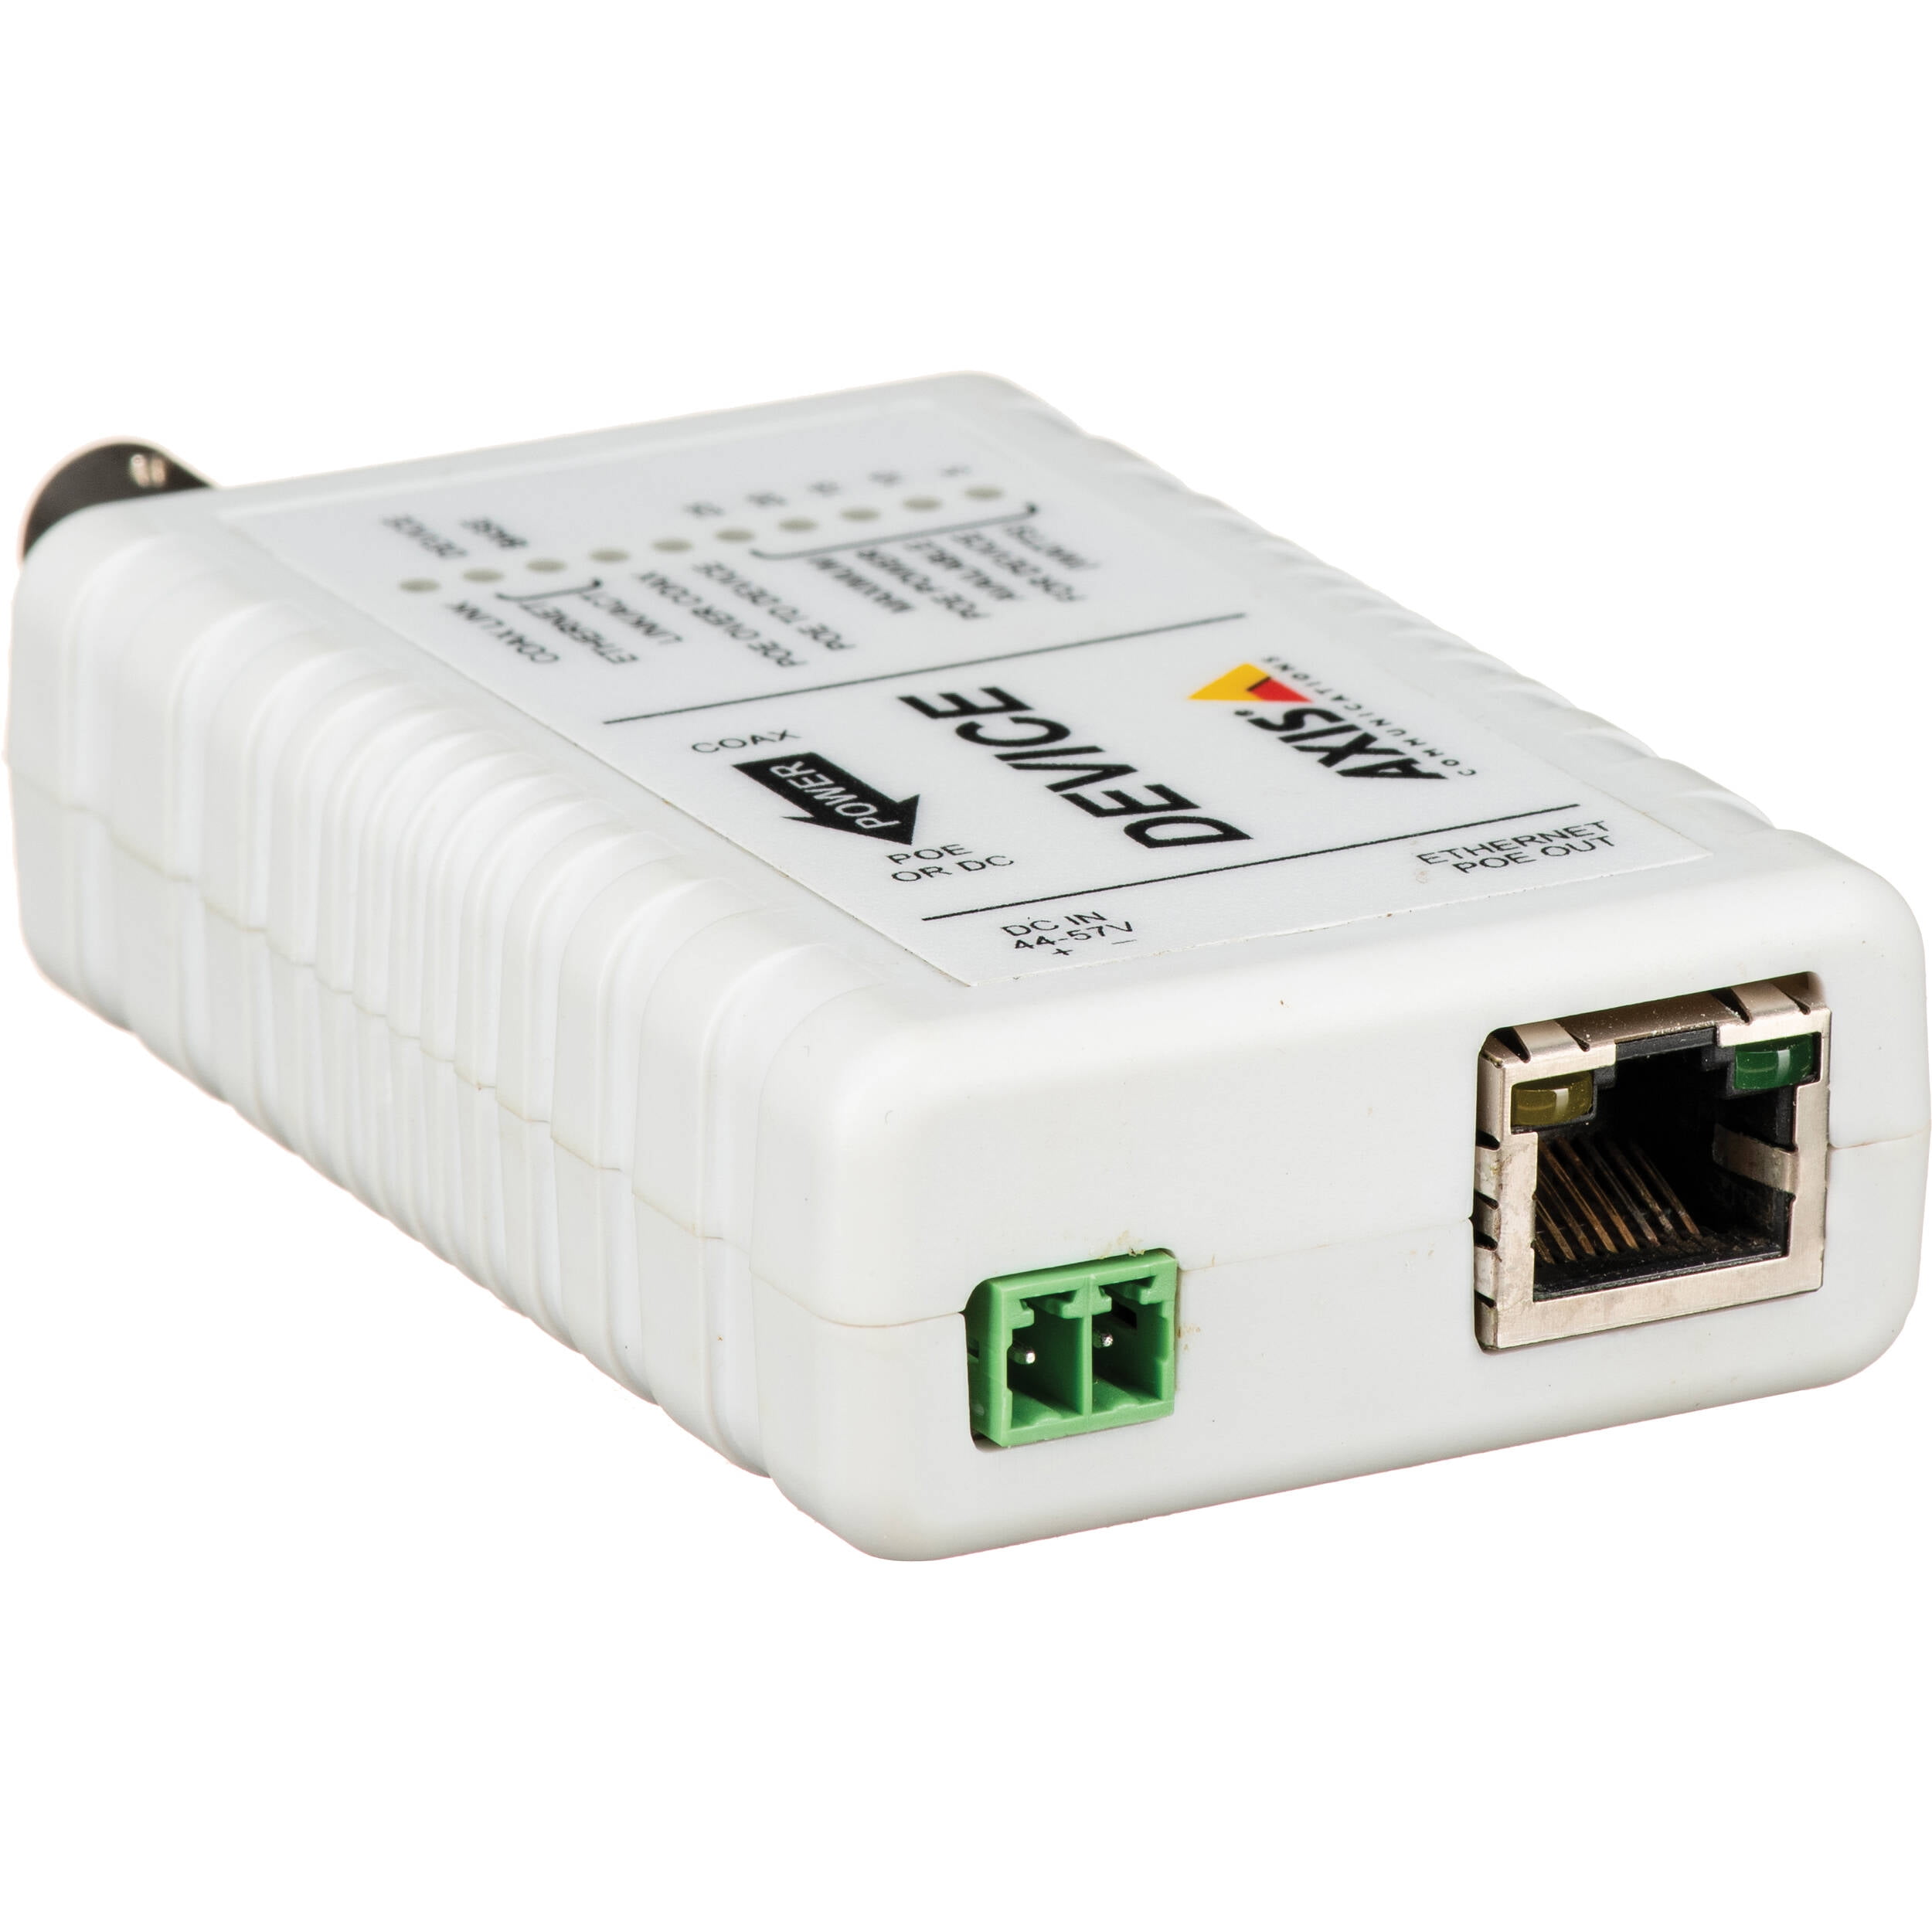 Axis 5027-421 Ethernet Over Coax Device PoE+ Adapter for Security System 